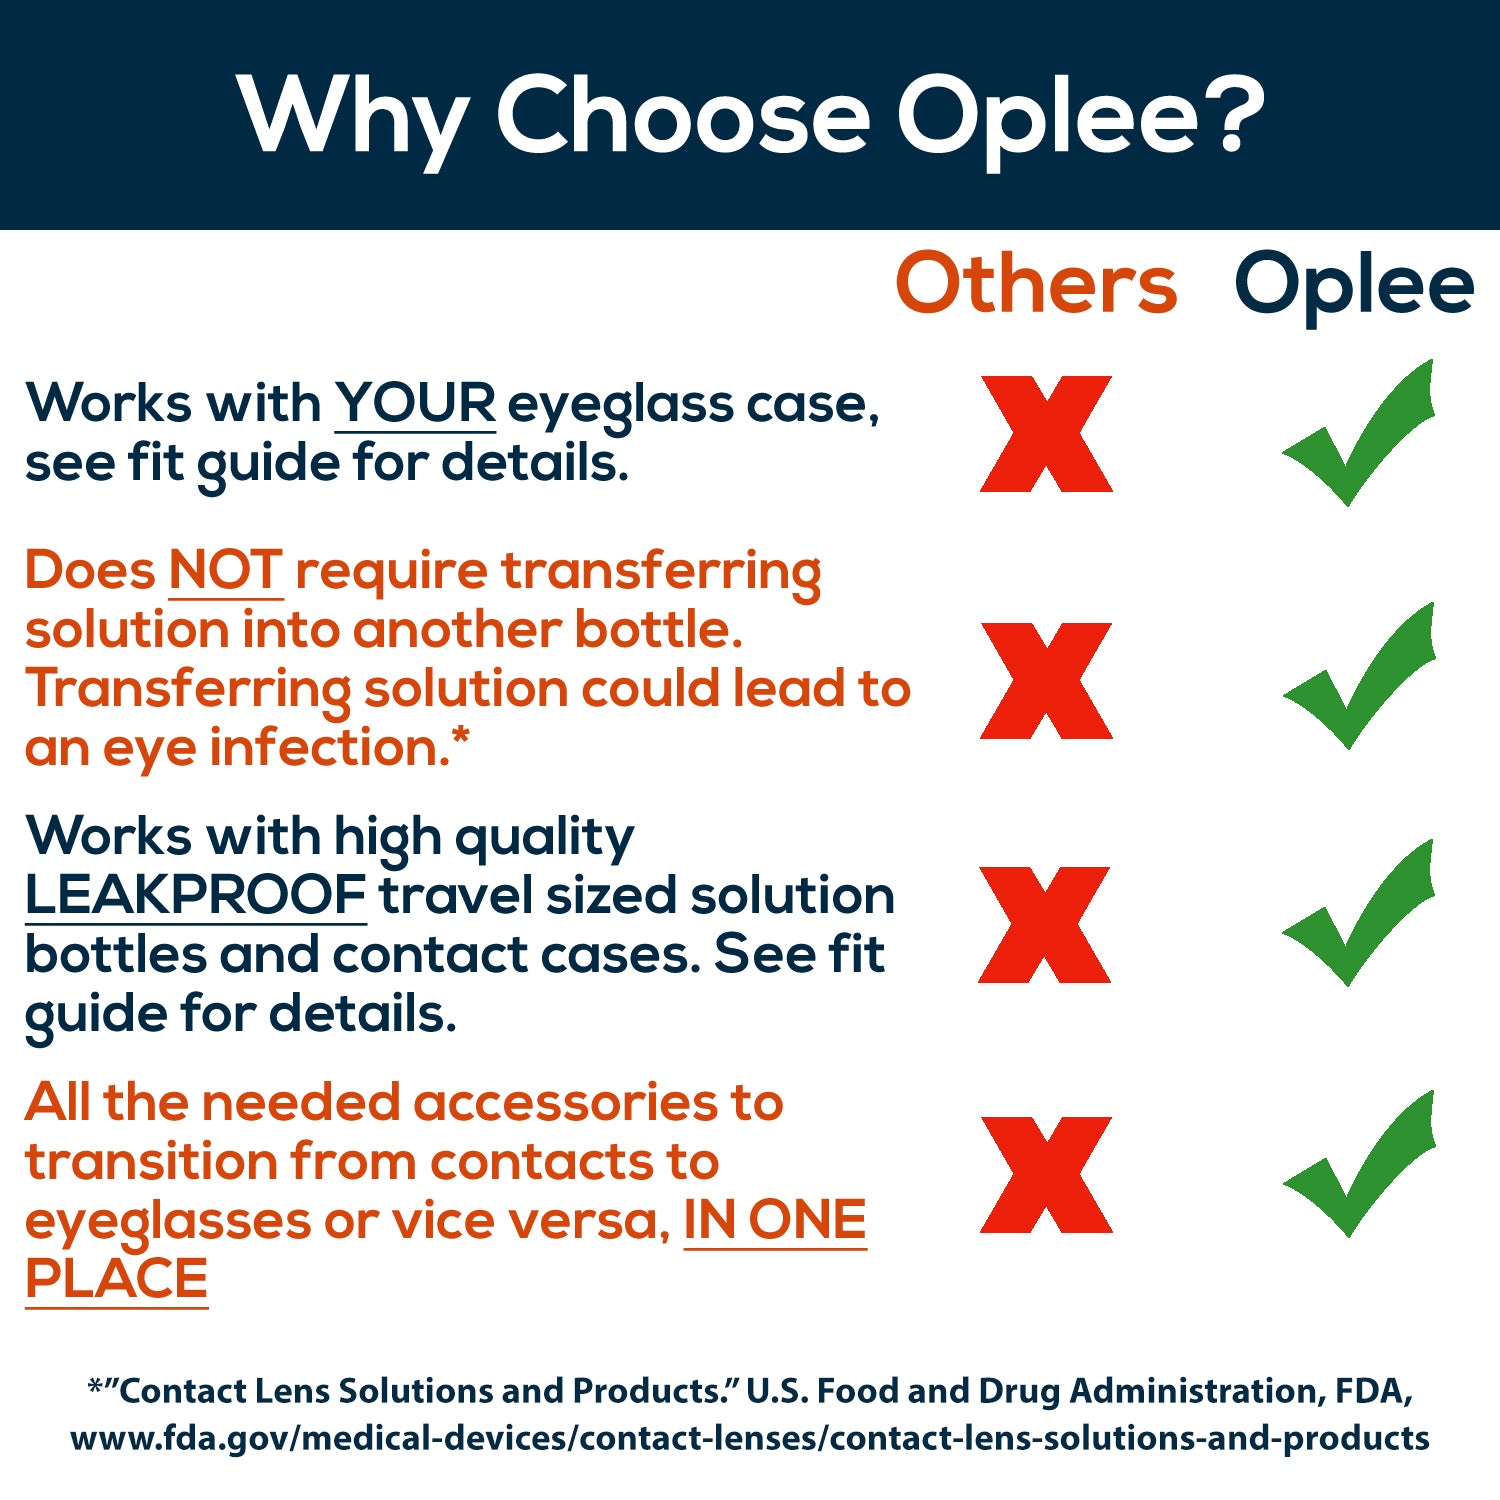 Load image into Gallery viewer, Oplee Travel Contact Lens Case - Why Choose Oplee?